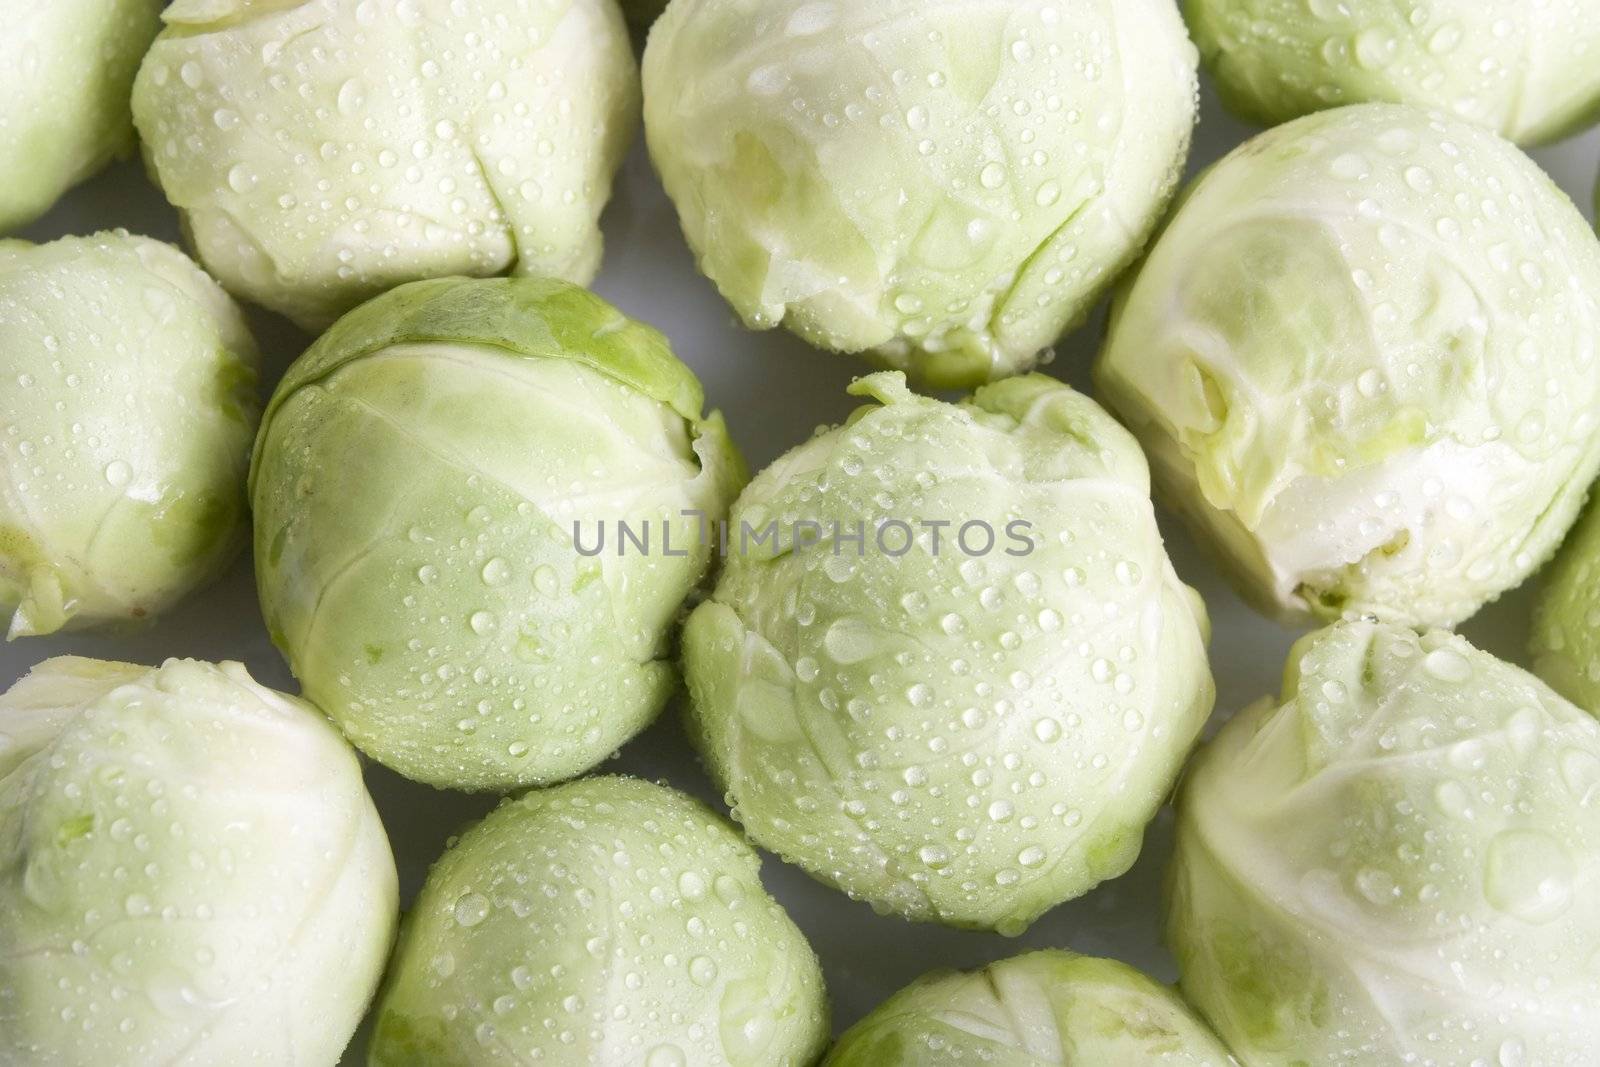 Brussel Sprouts by charlotteLake